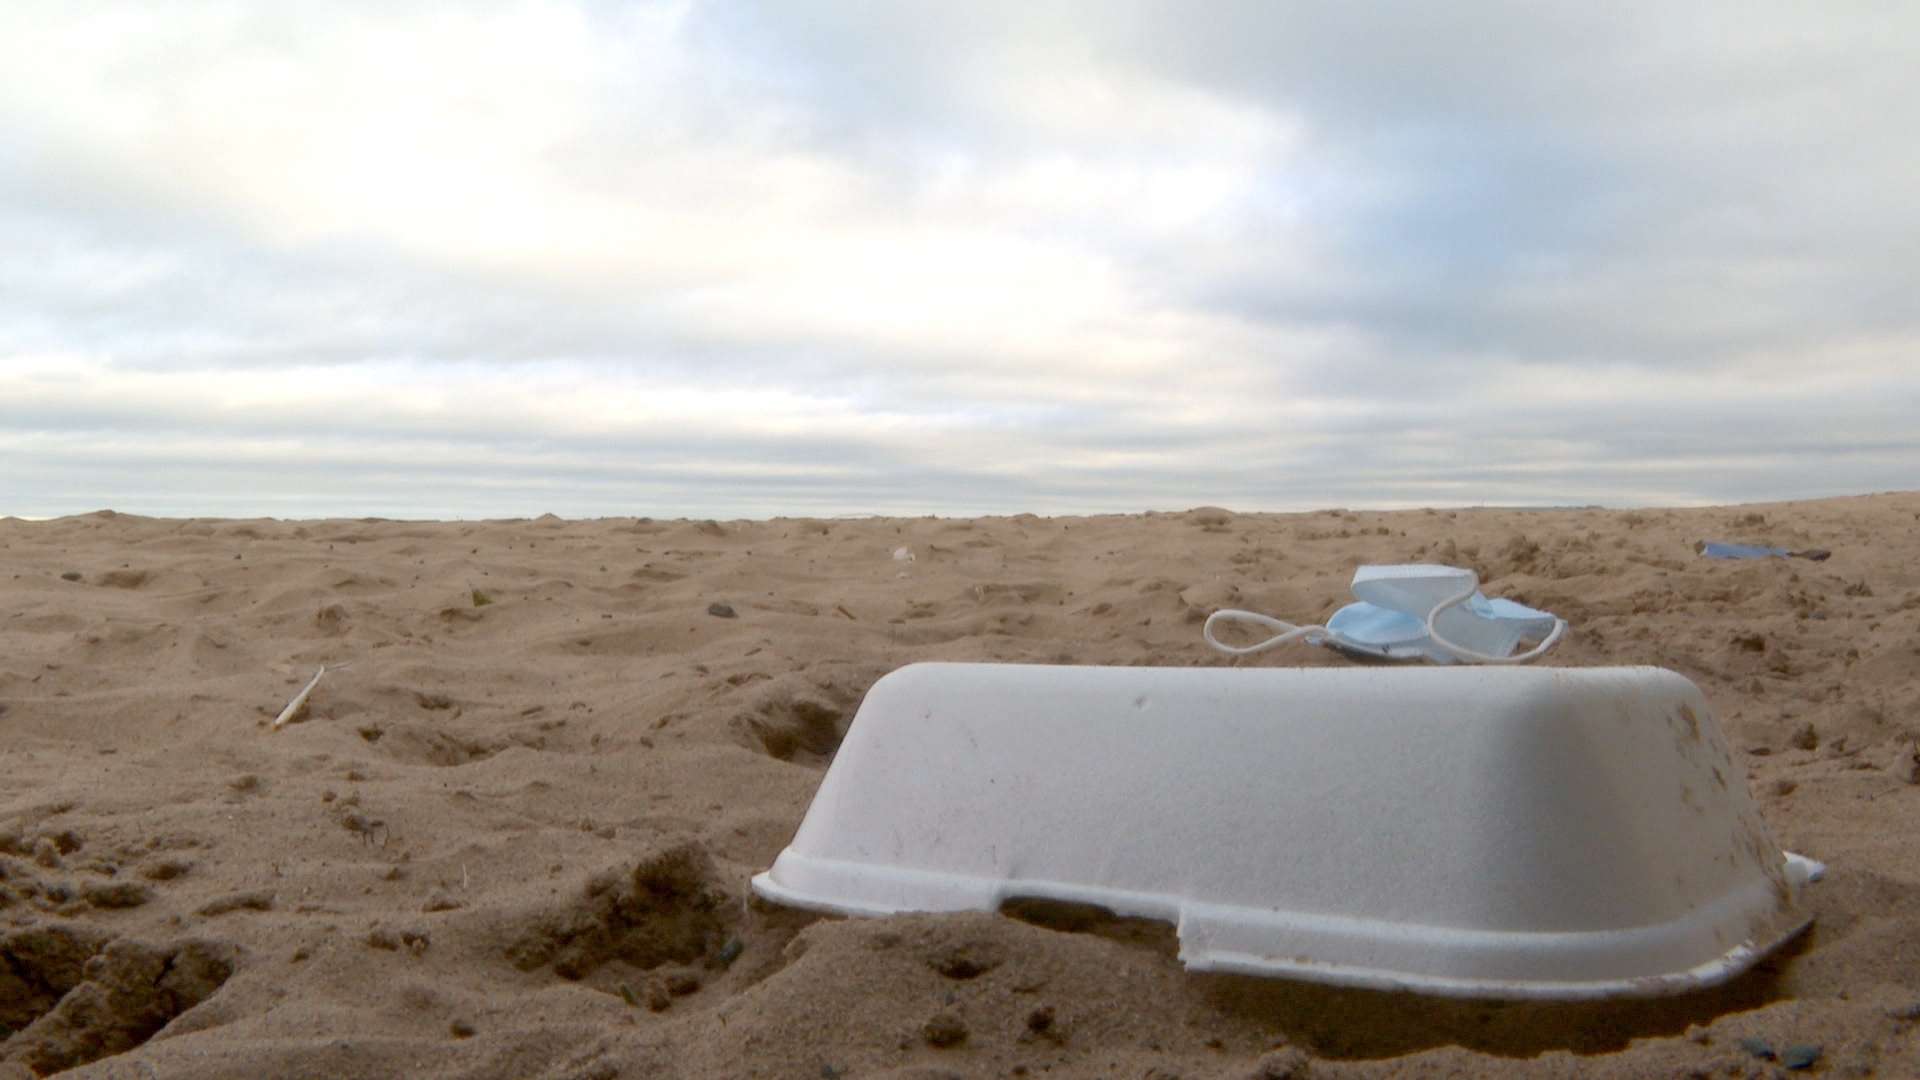 Local businesses want to stop food boxes being discarded on Portobello beach.